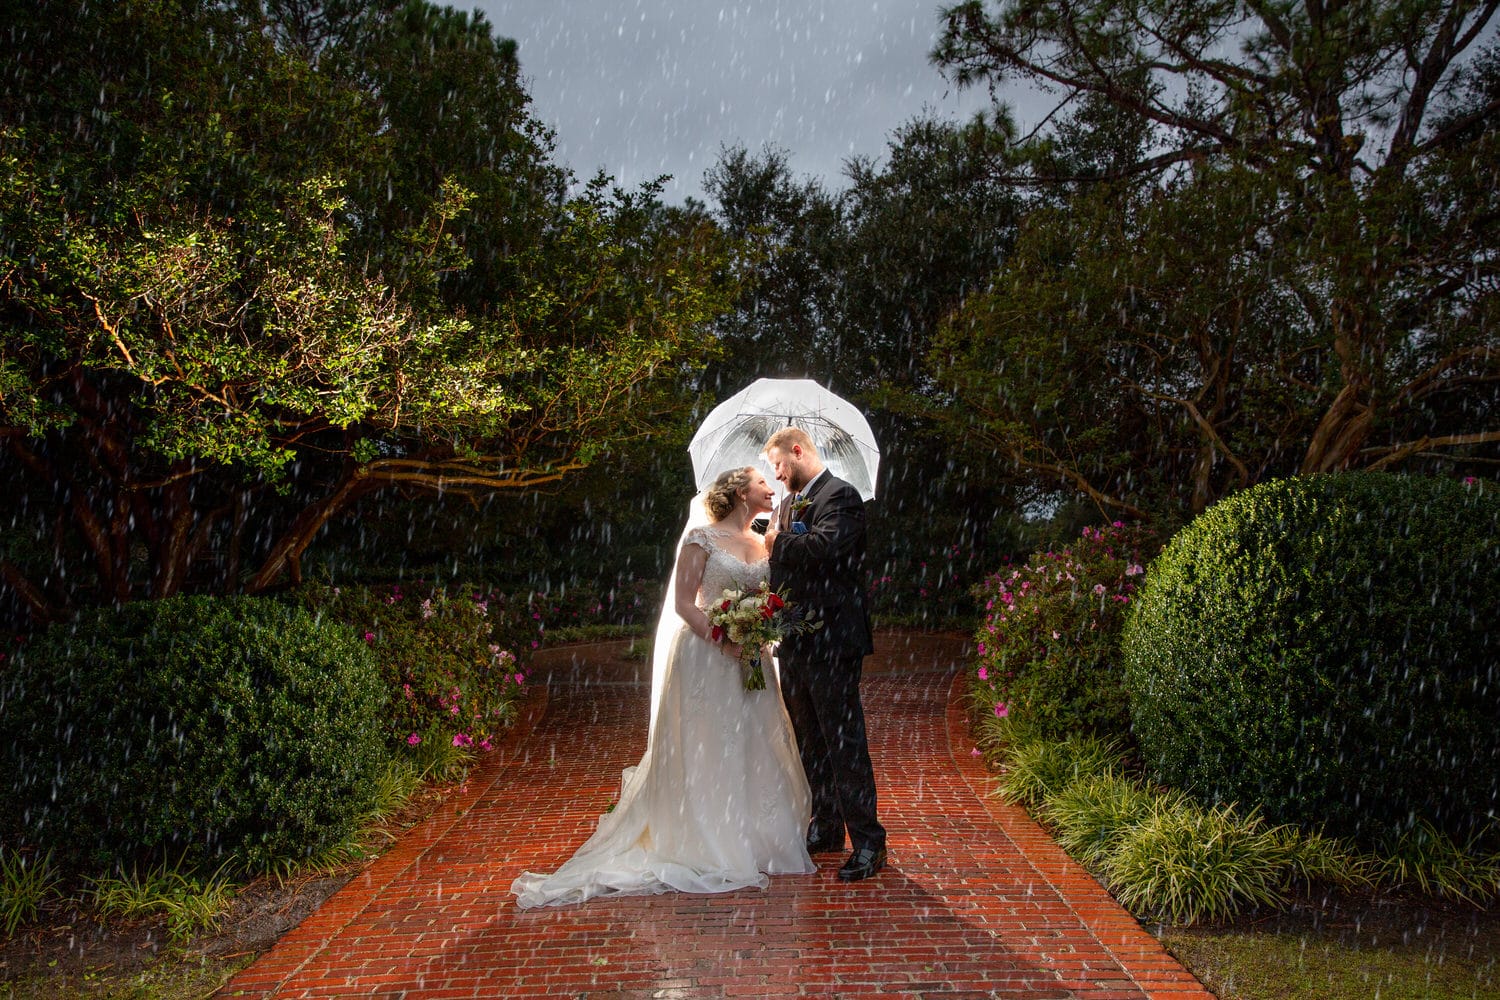 Bride & groom smile at each other under umbrella during their rainy day wedding at Pine Lakes Country Club.